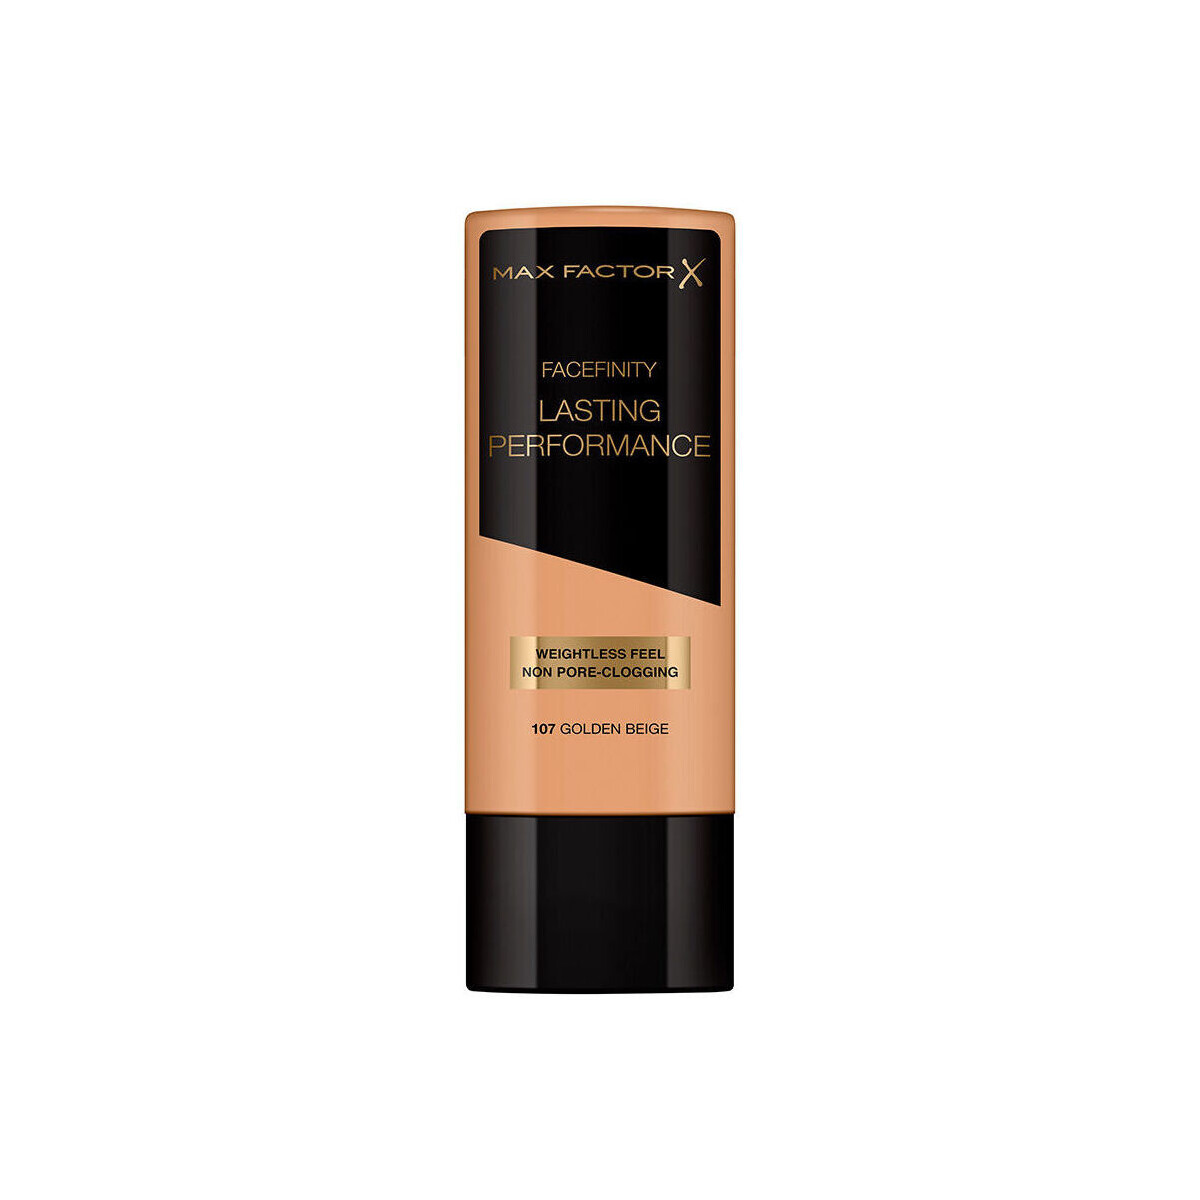 Beauty Make-up & Foundation  Max Factor Lasting Performance Foundation 107 